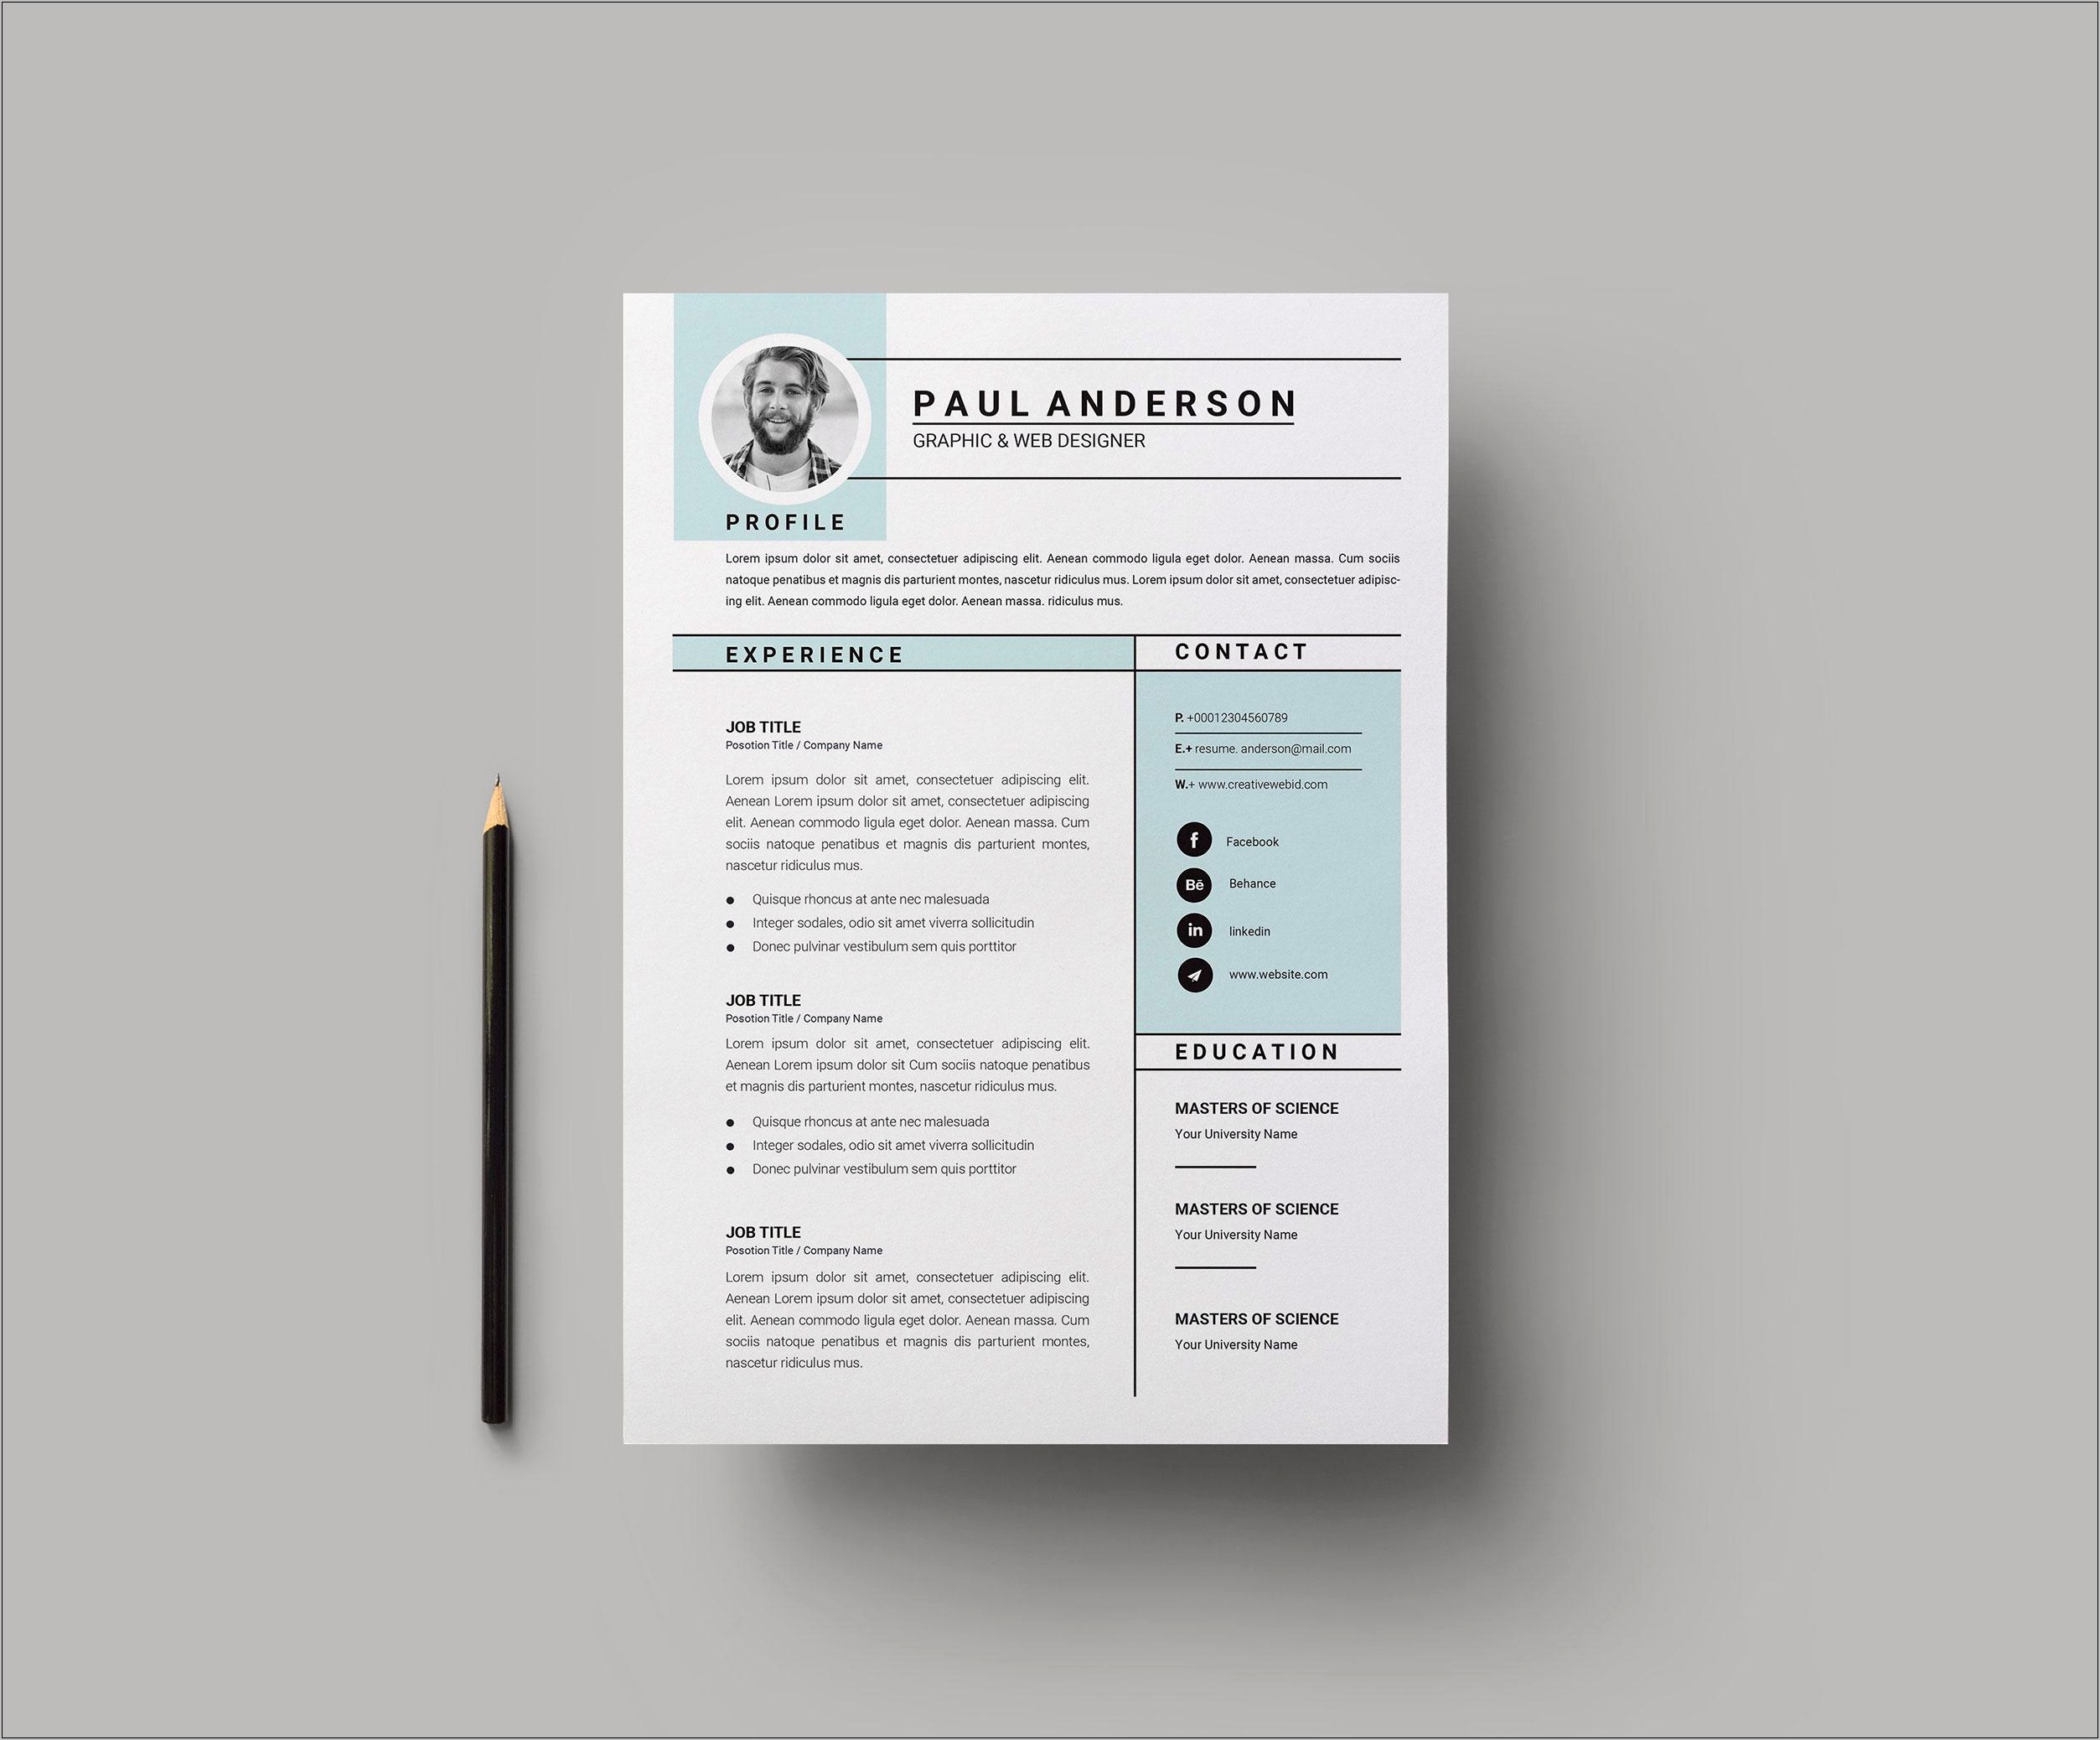 Resume Examples With Behence Links